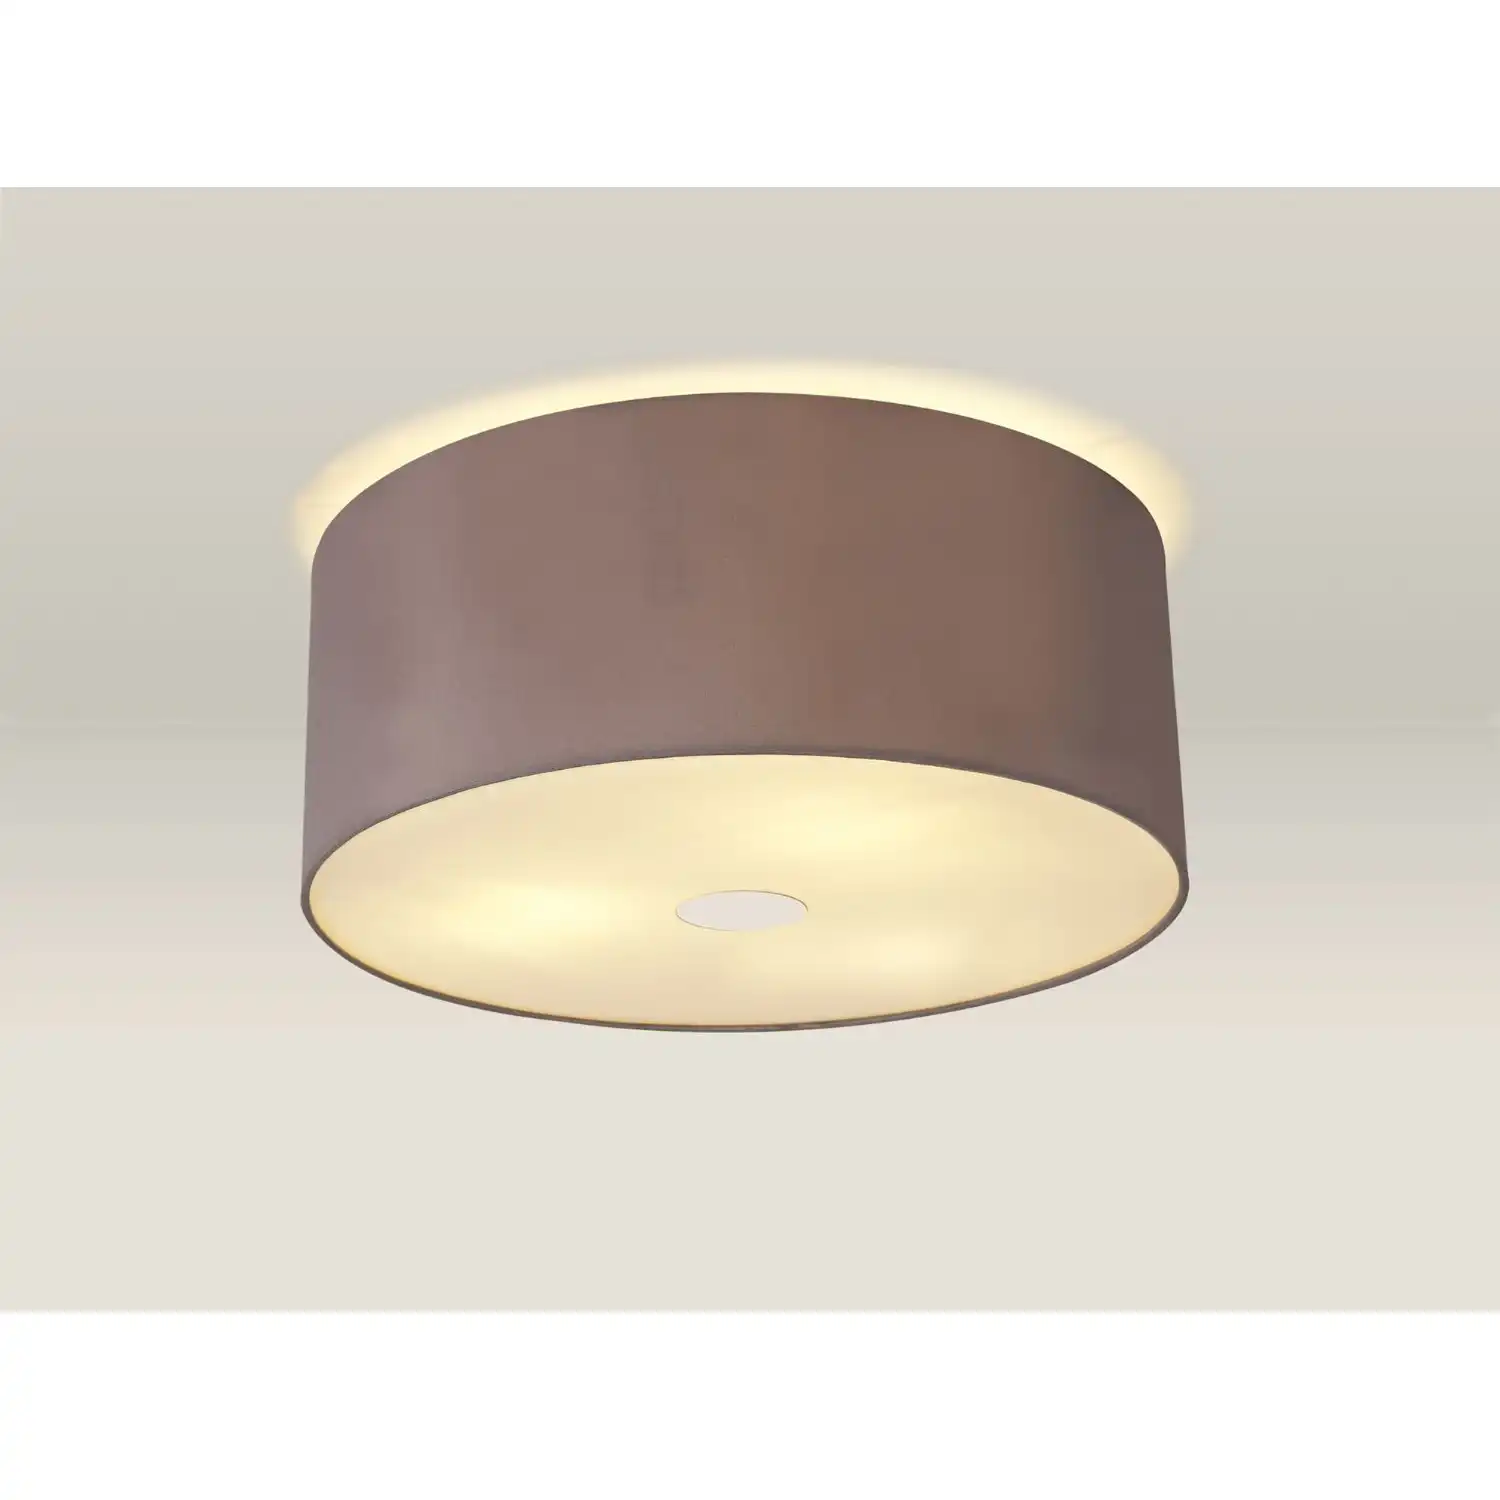 Baymont Polished Chrome 3 Light E27 Drop Flush Ceiling c w 500 Dual Faux Silk Fabric Shade, Taupe Halo Gold And 500mm Frosted PC Acrylic Diffuser